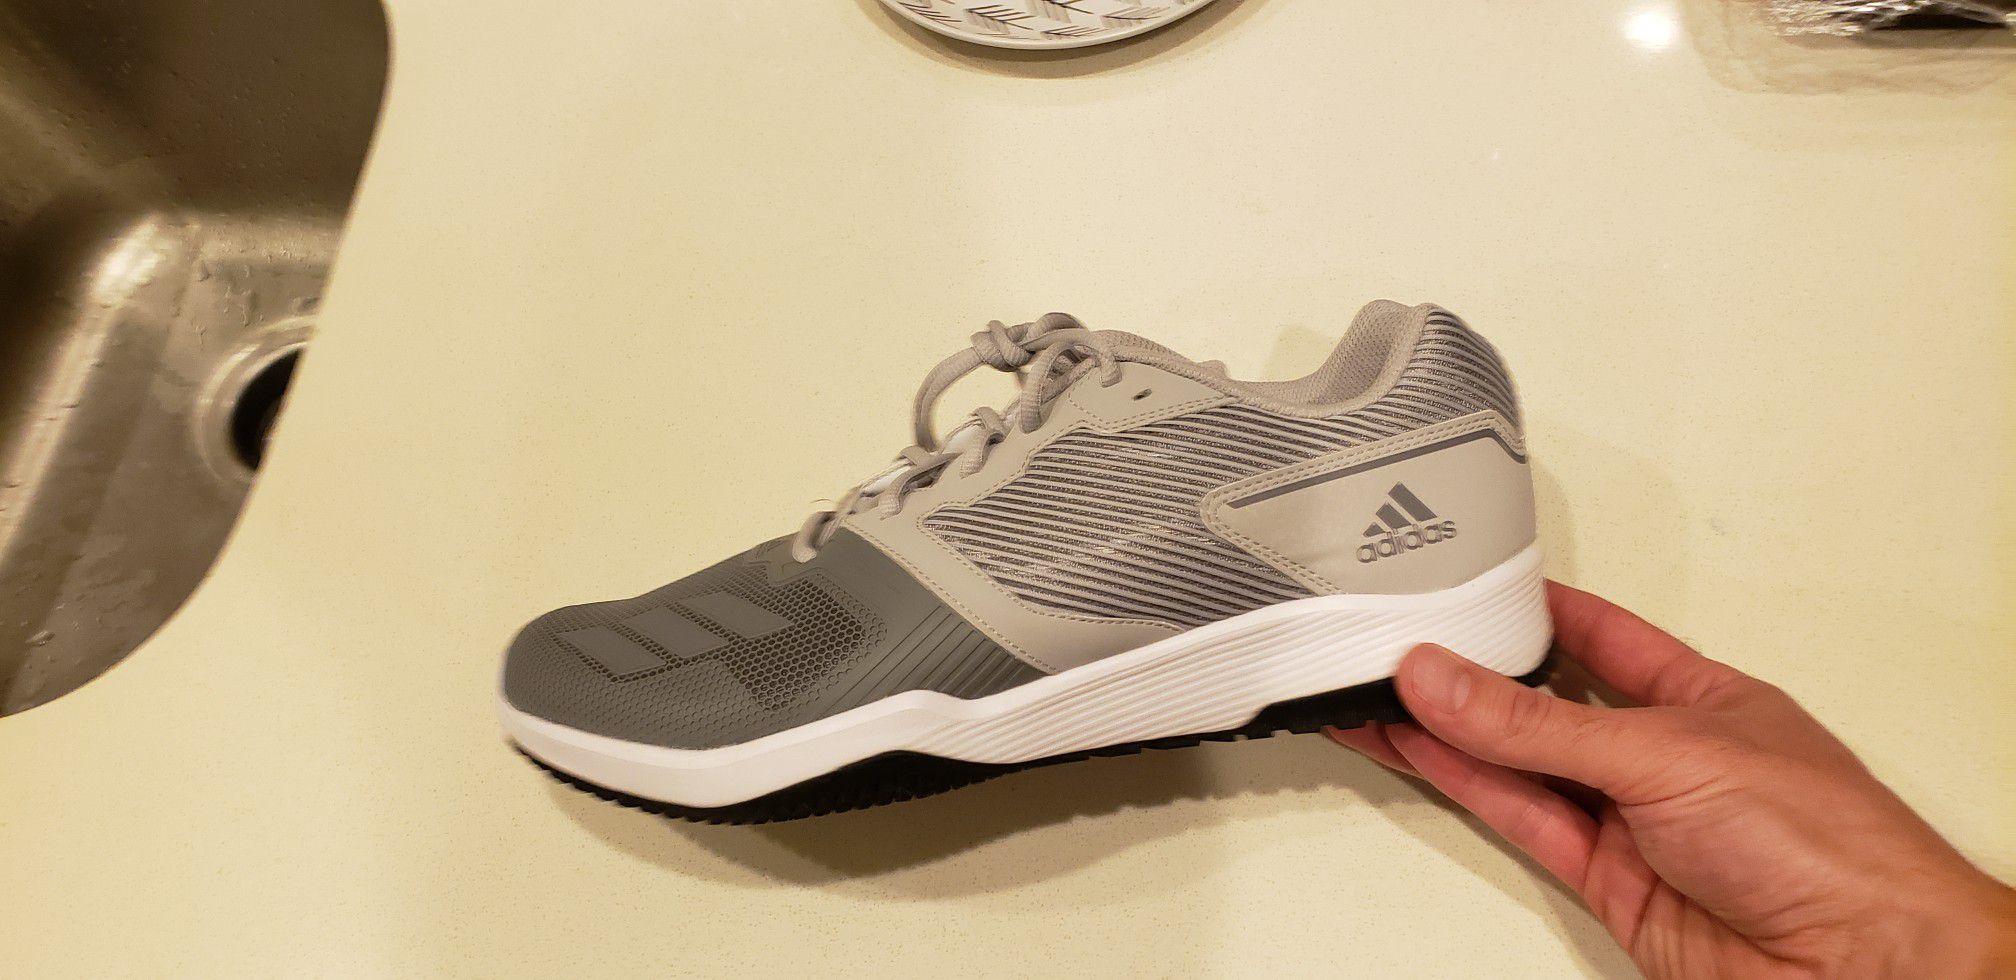 Adidas Gym Warrior 2.0 Tennis Shoes for Sale in WA - OfferUp